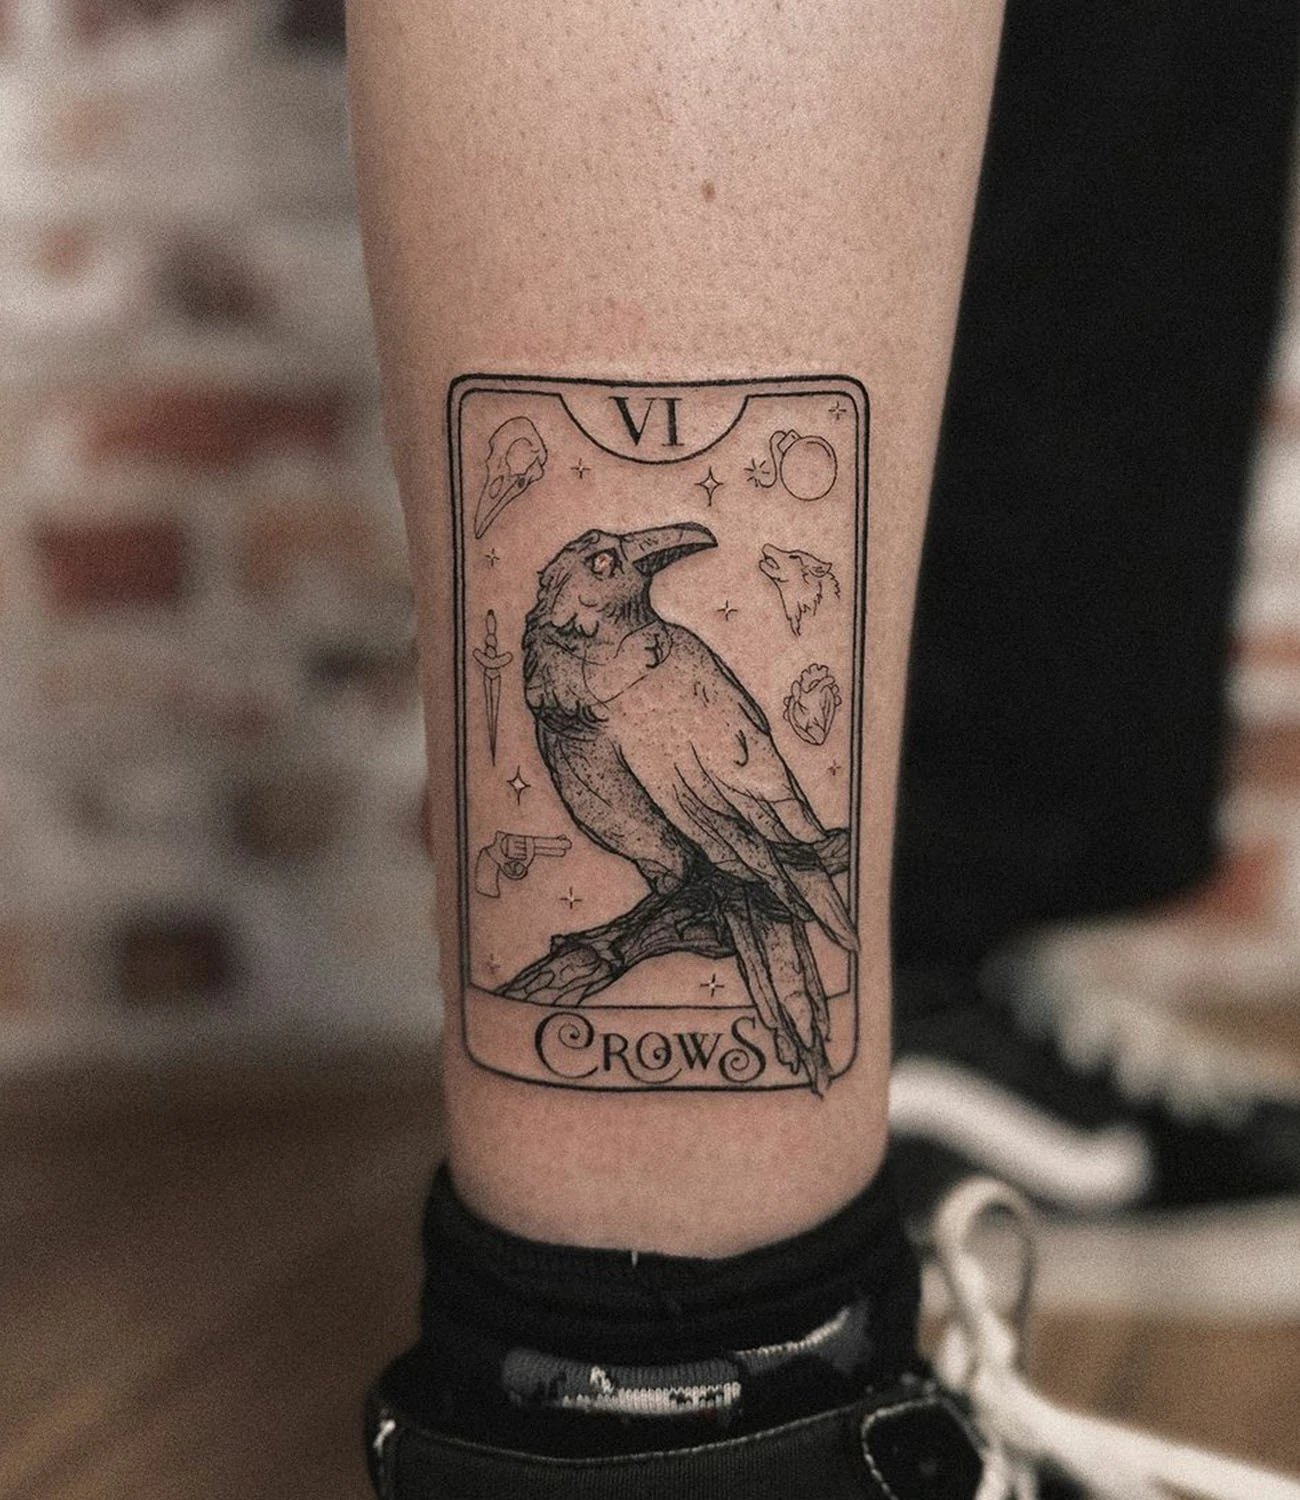 Six of Crows Tattoo